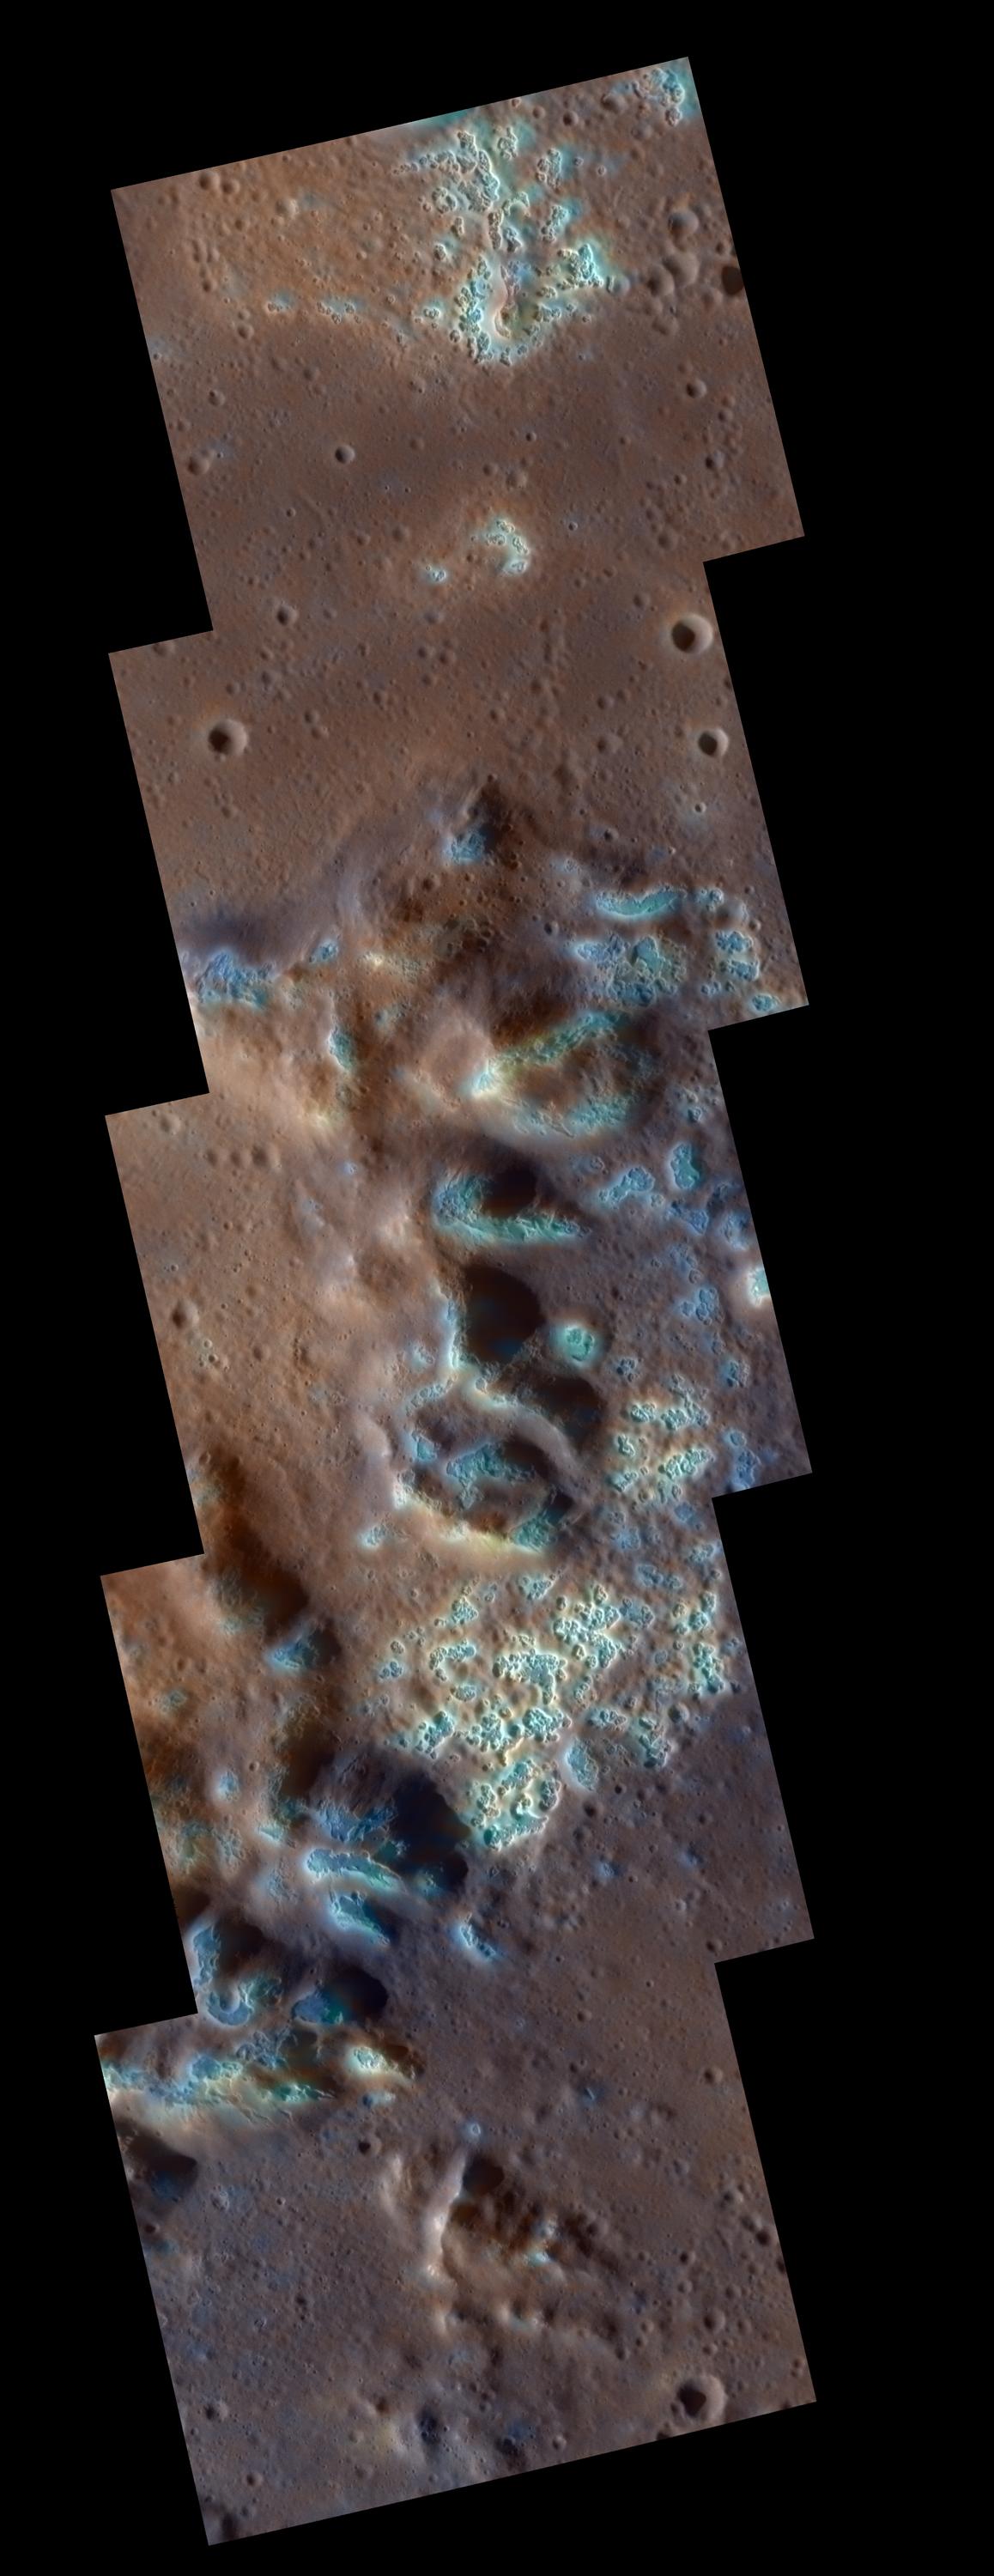 Unusual Hollows Discovered on Planet Mercury